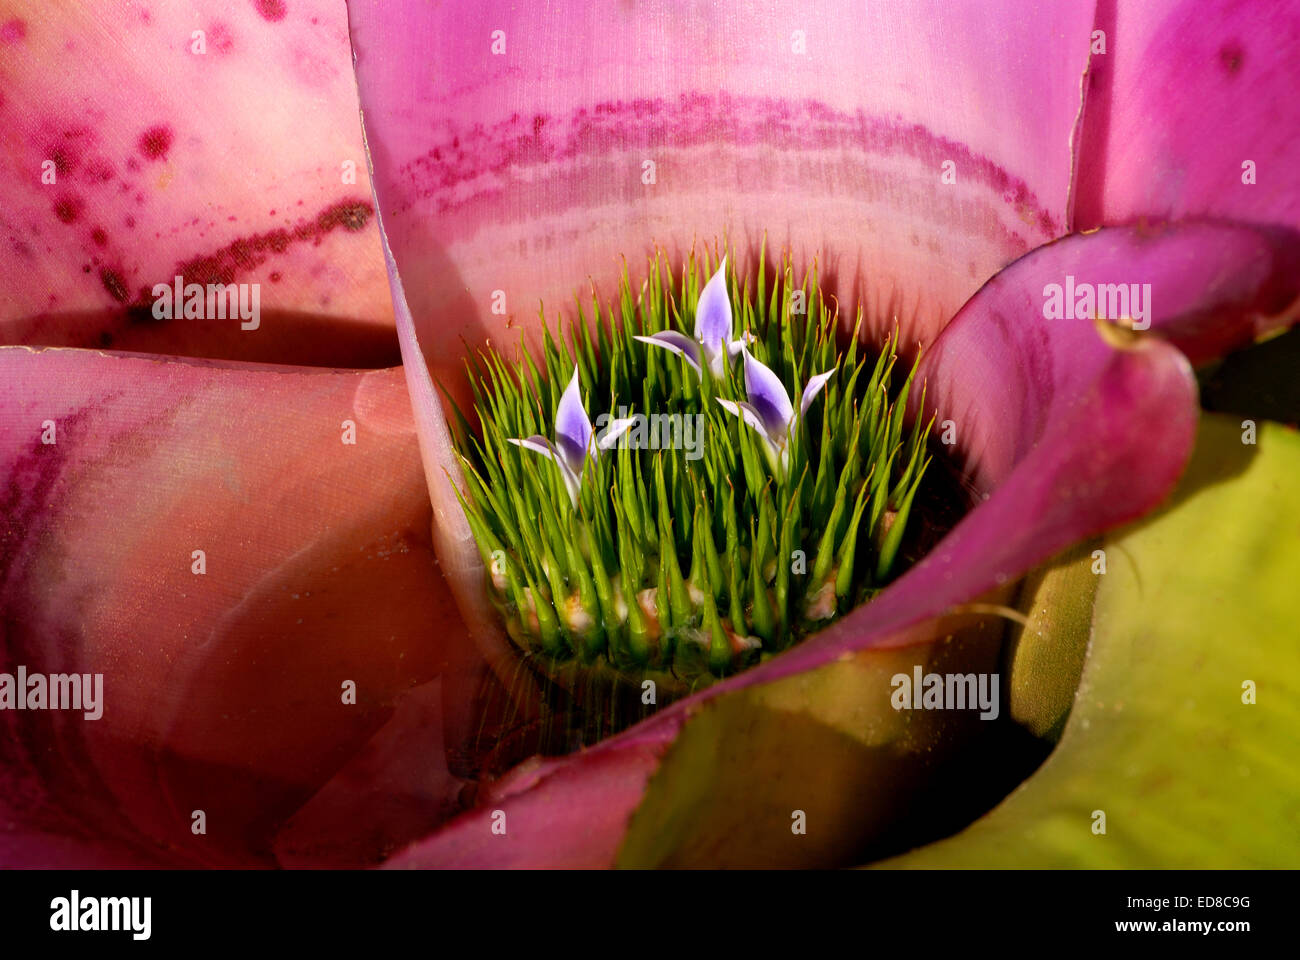 Flowers on a pink bromeliad Stock Photo